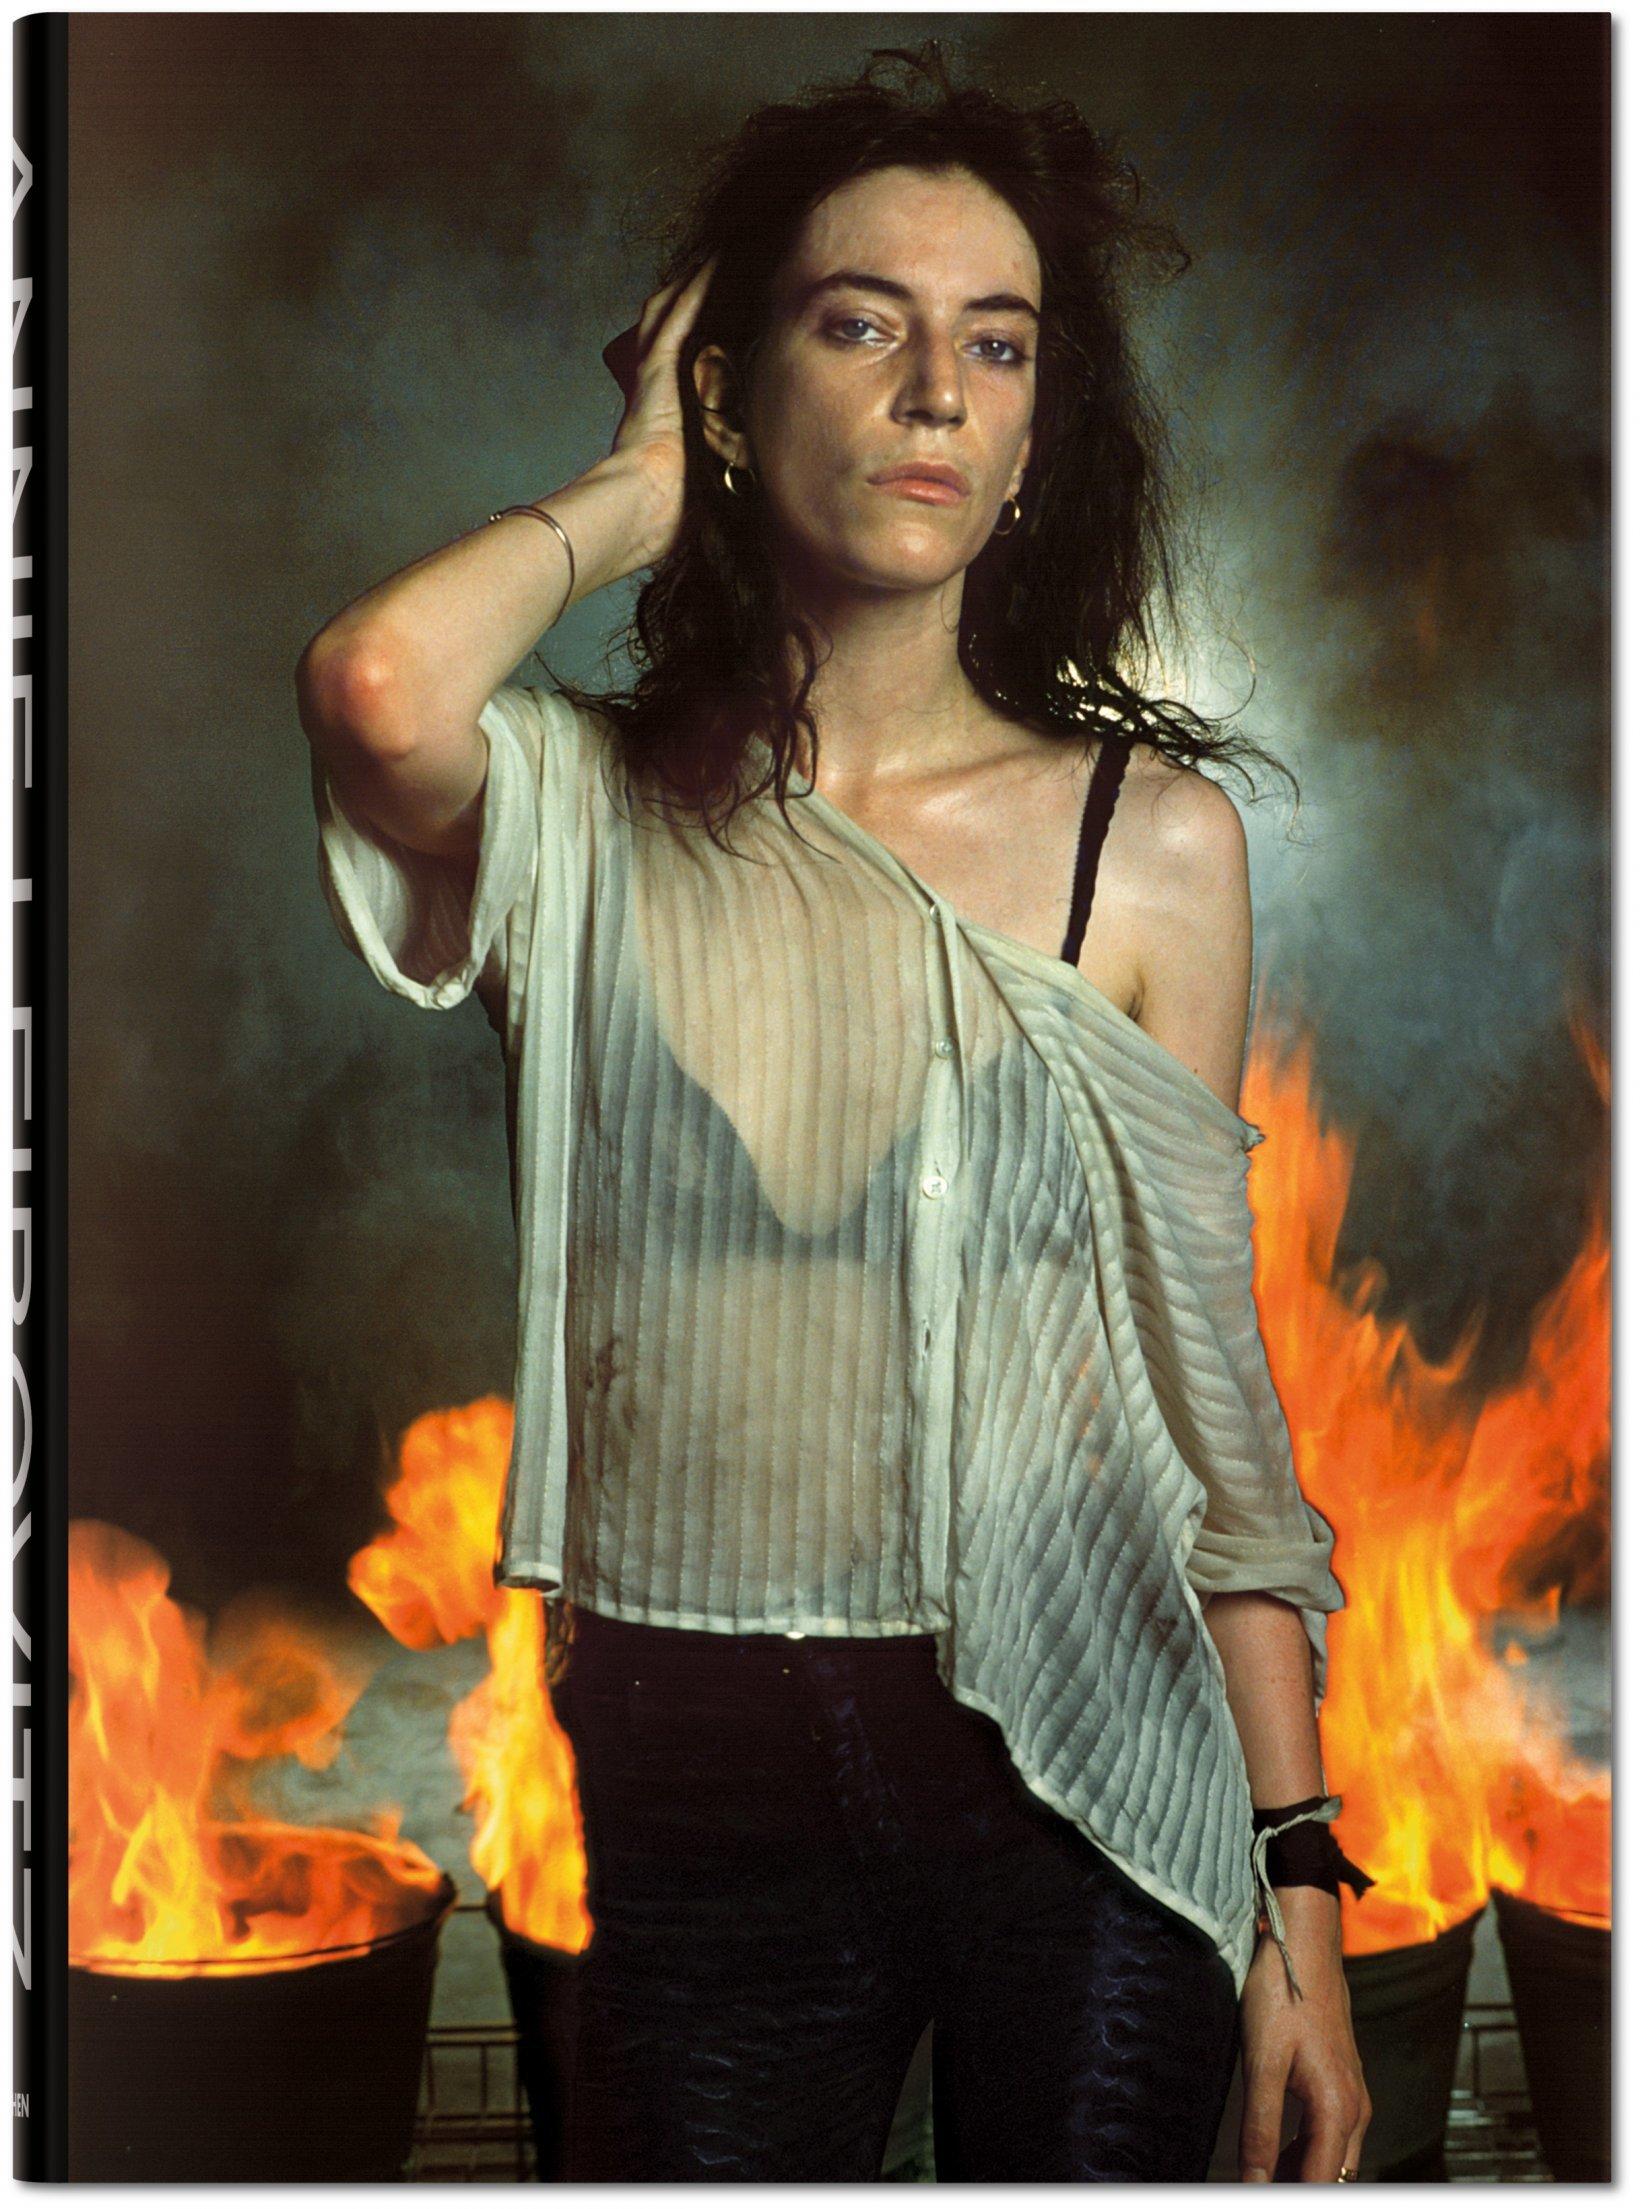 Patti Smith, New Orleans, Louisiana, 1978

Spanning the 40+ year career of photographed Annie Leibovitz. The book spans her work beginning reportage style photography following The Rolling Stones around on tour through her sought after stylized